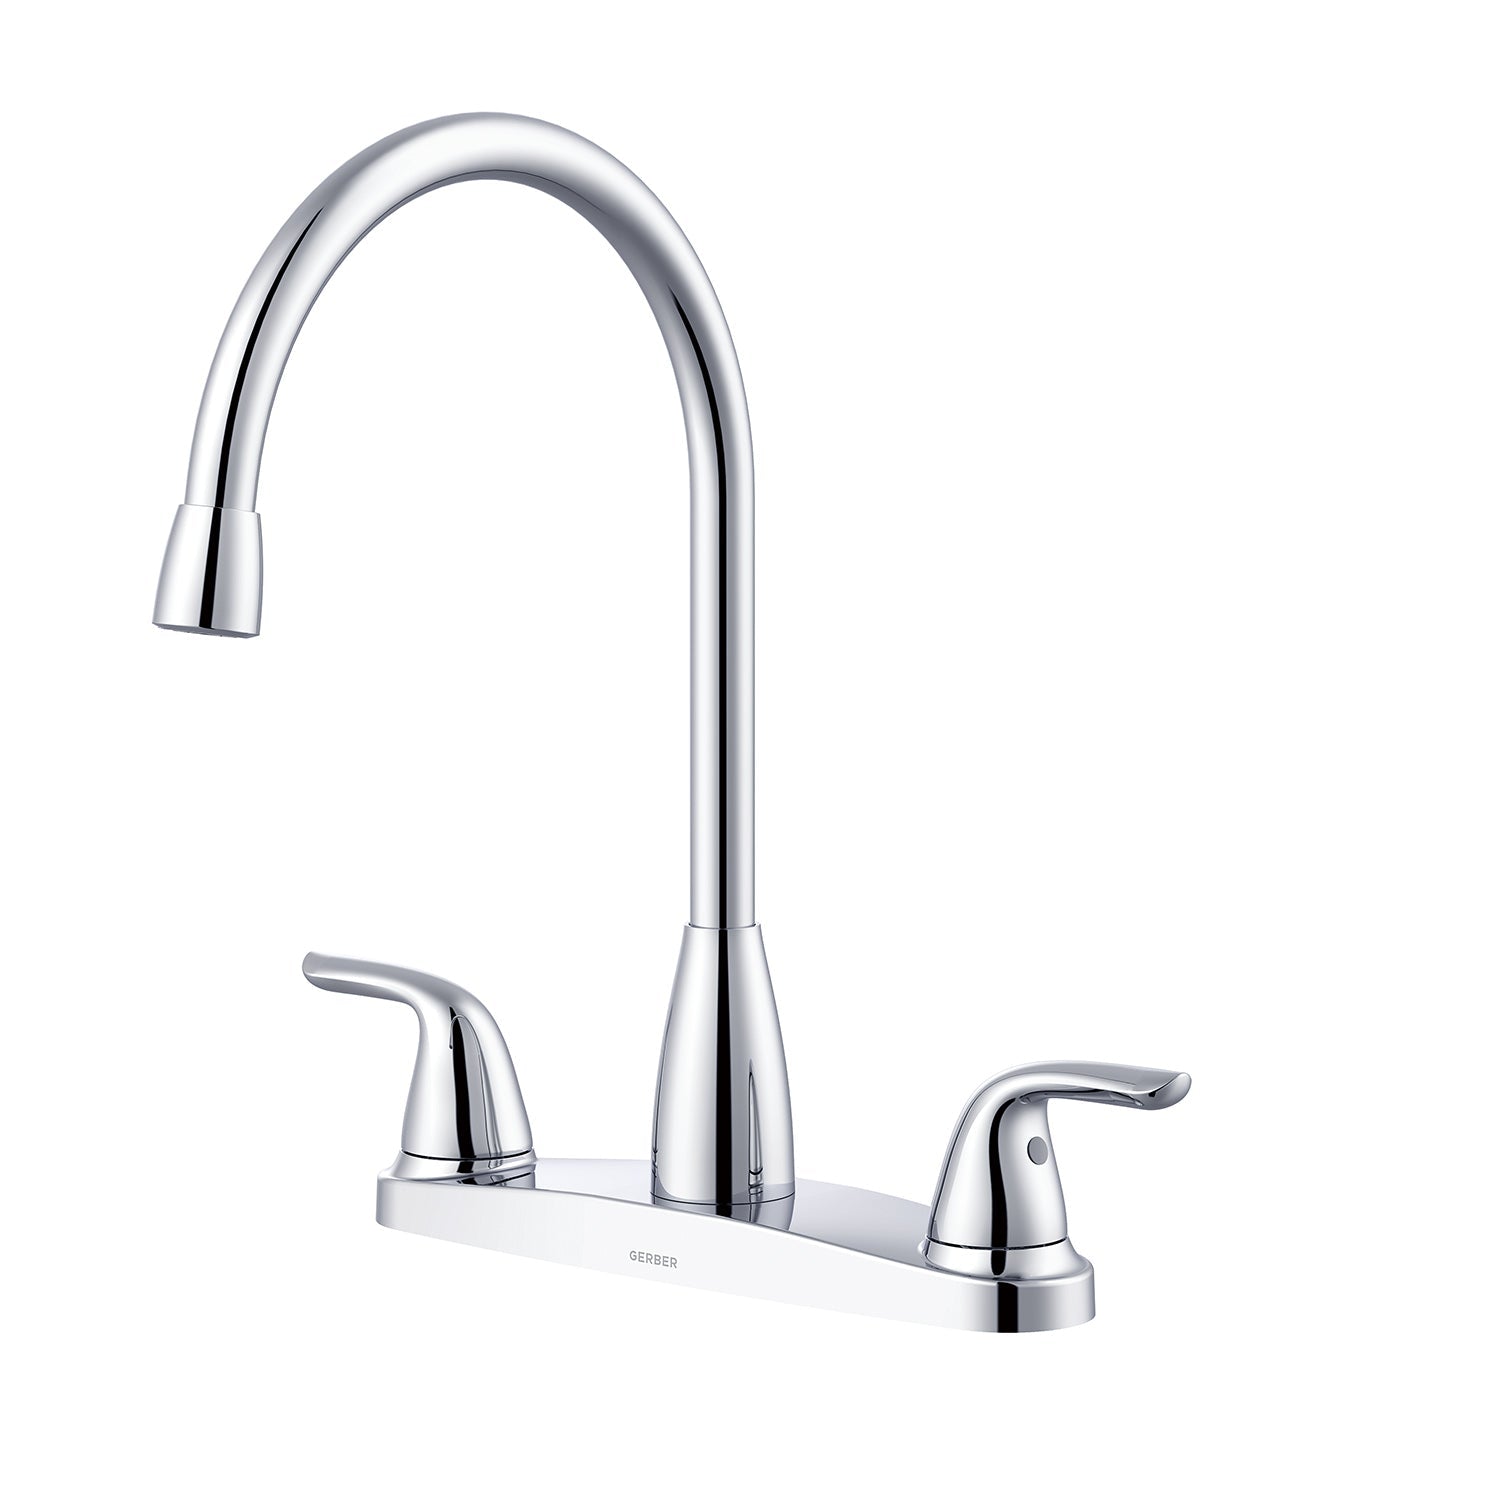 Viper 2H High Arc Kitchen Faucet w/out Spray 1.75gpm Chrome